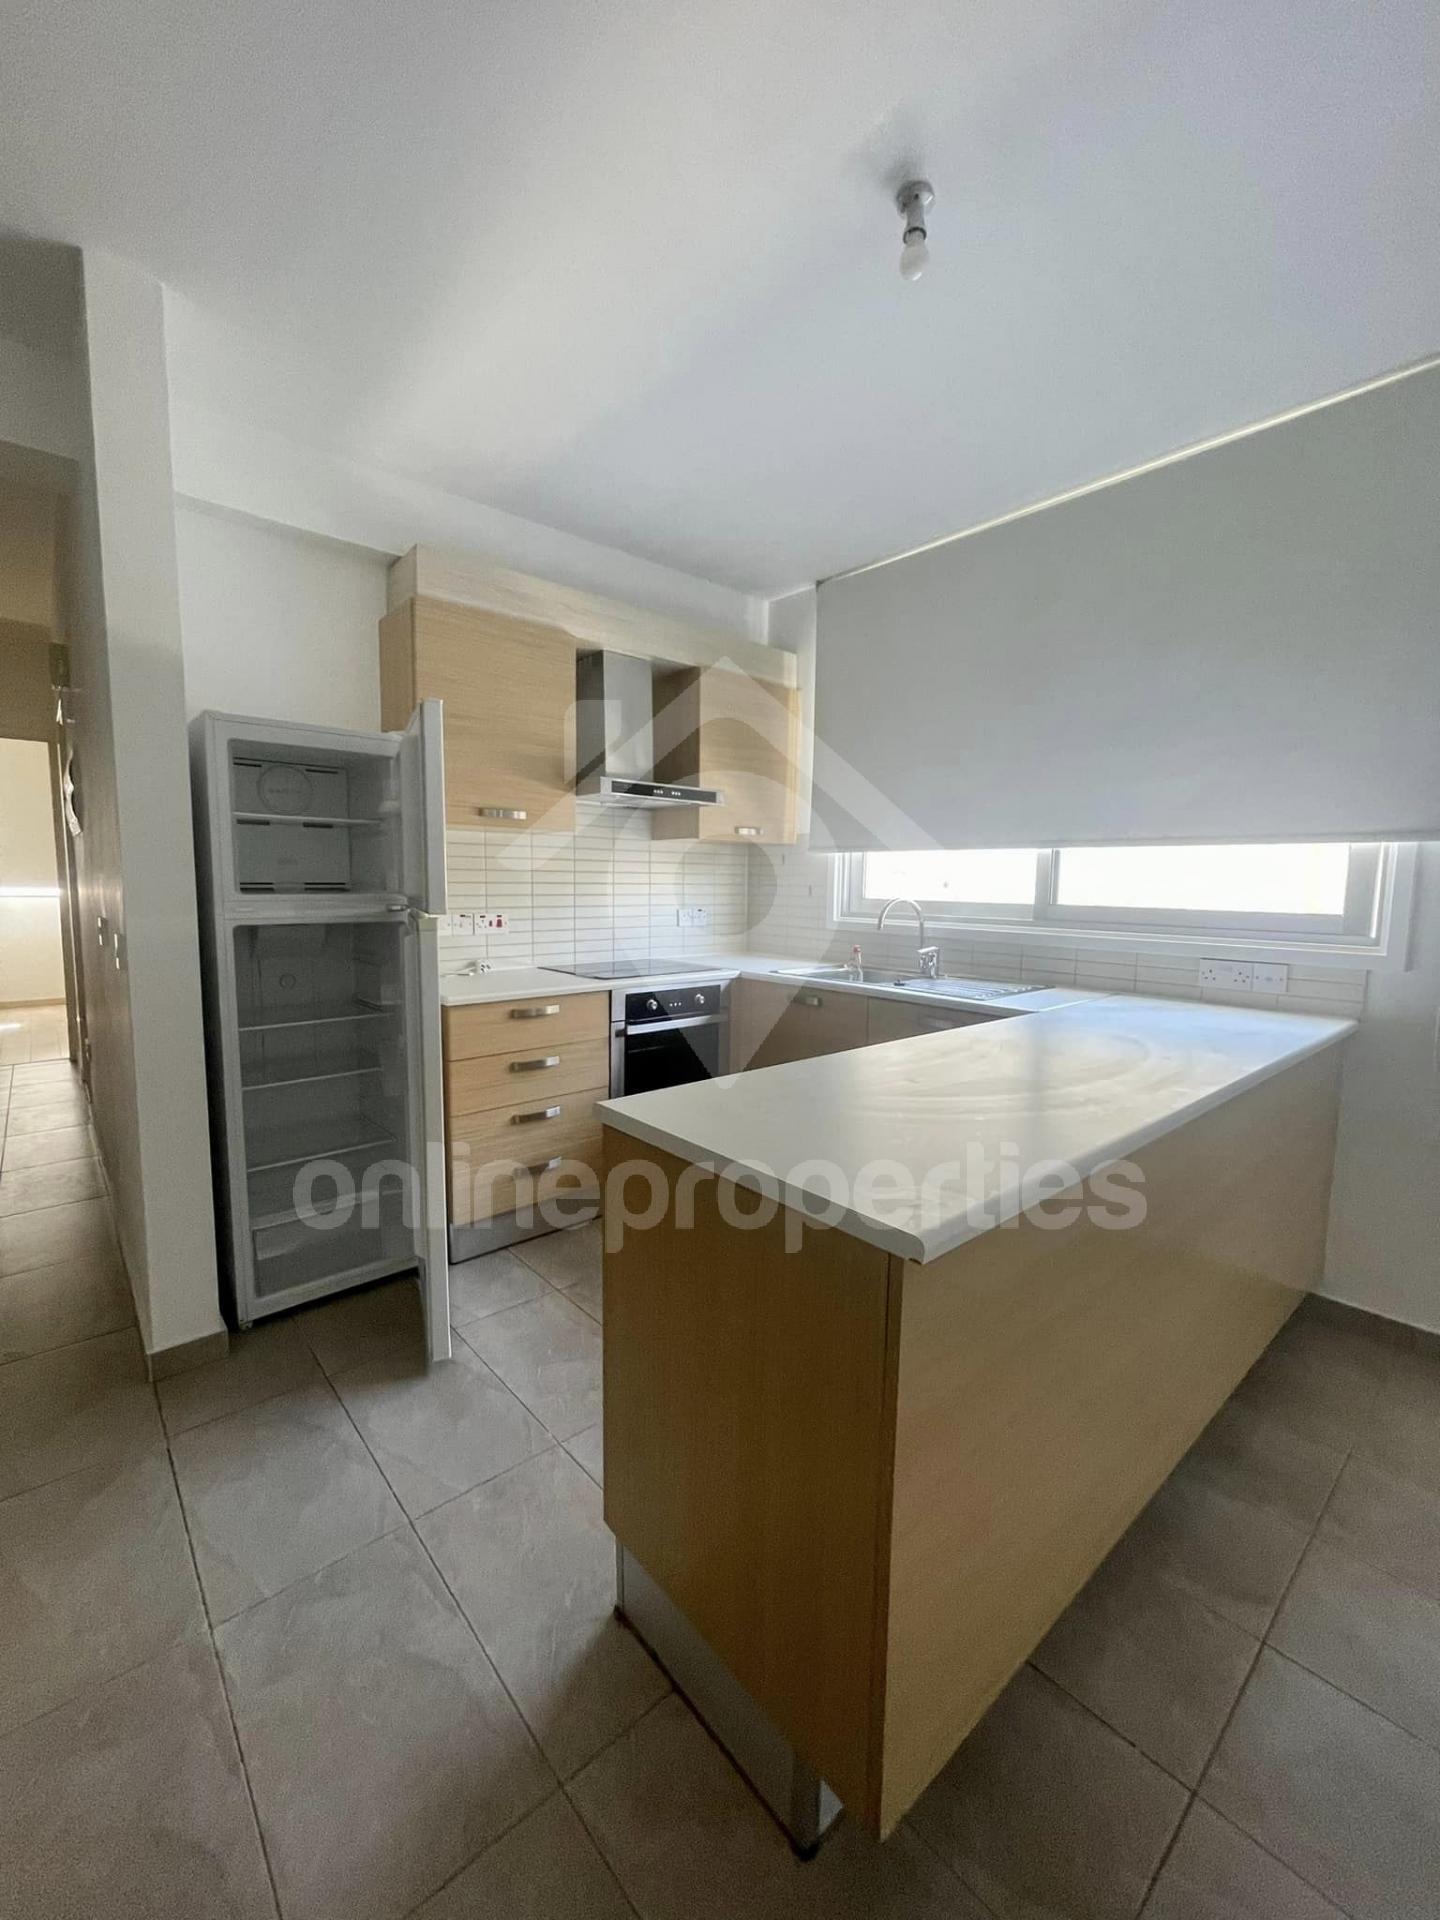 3-bedroom flat close to the high-way